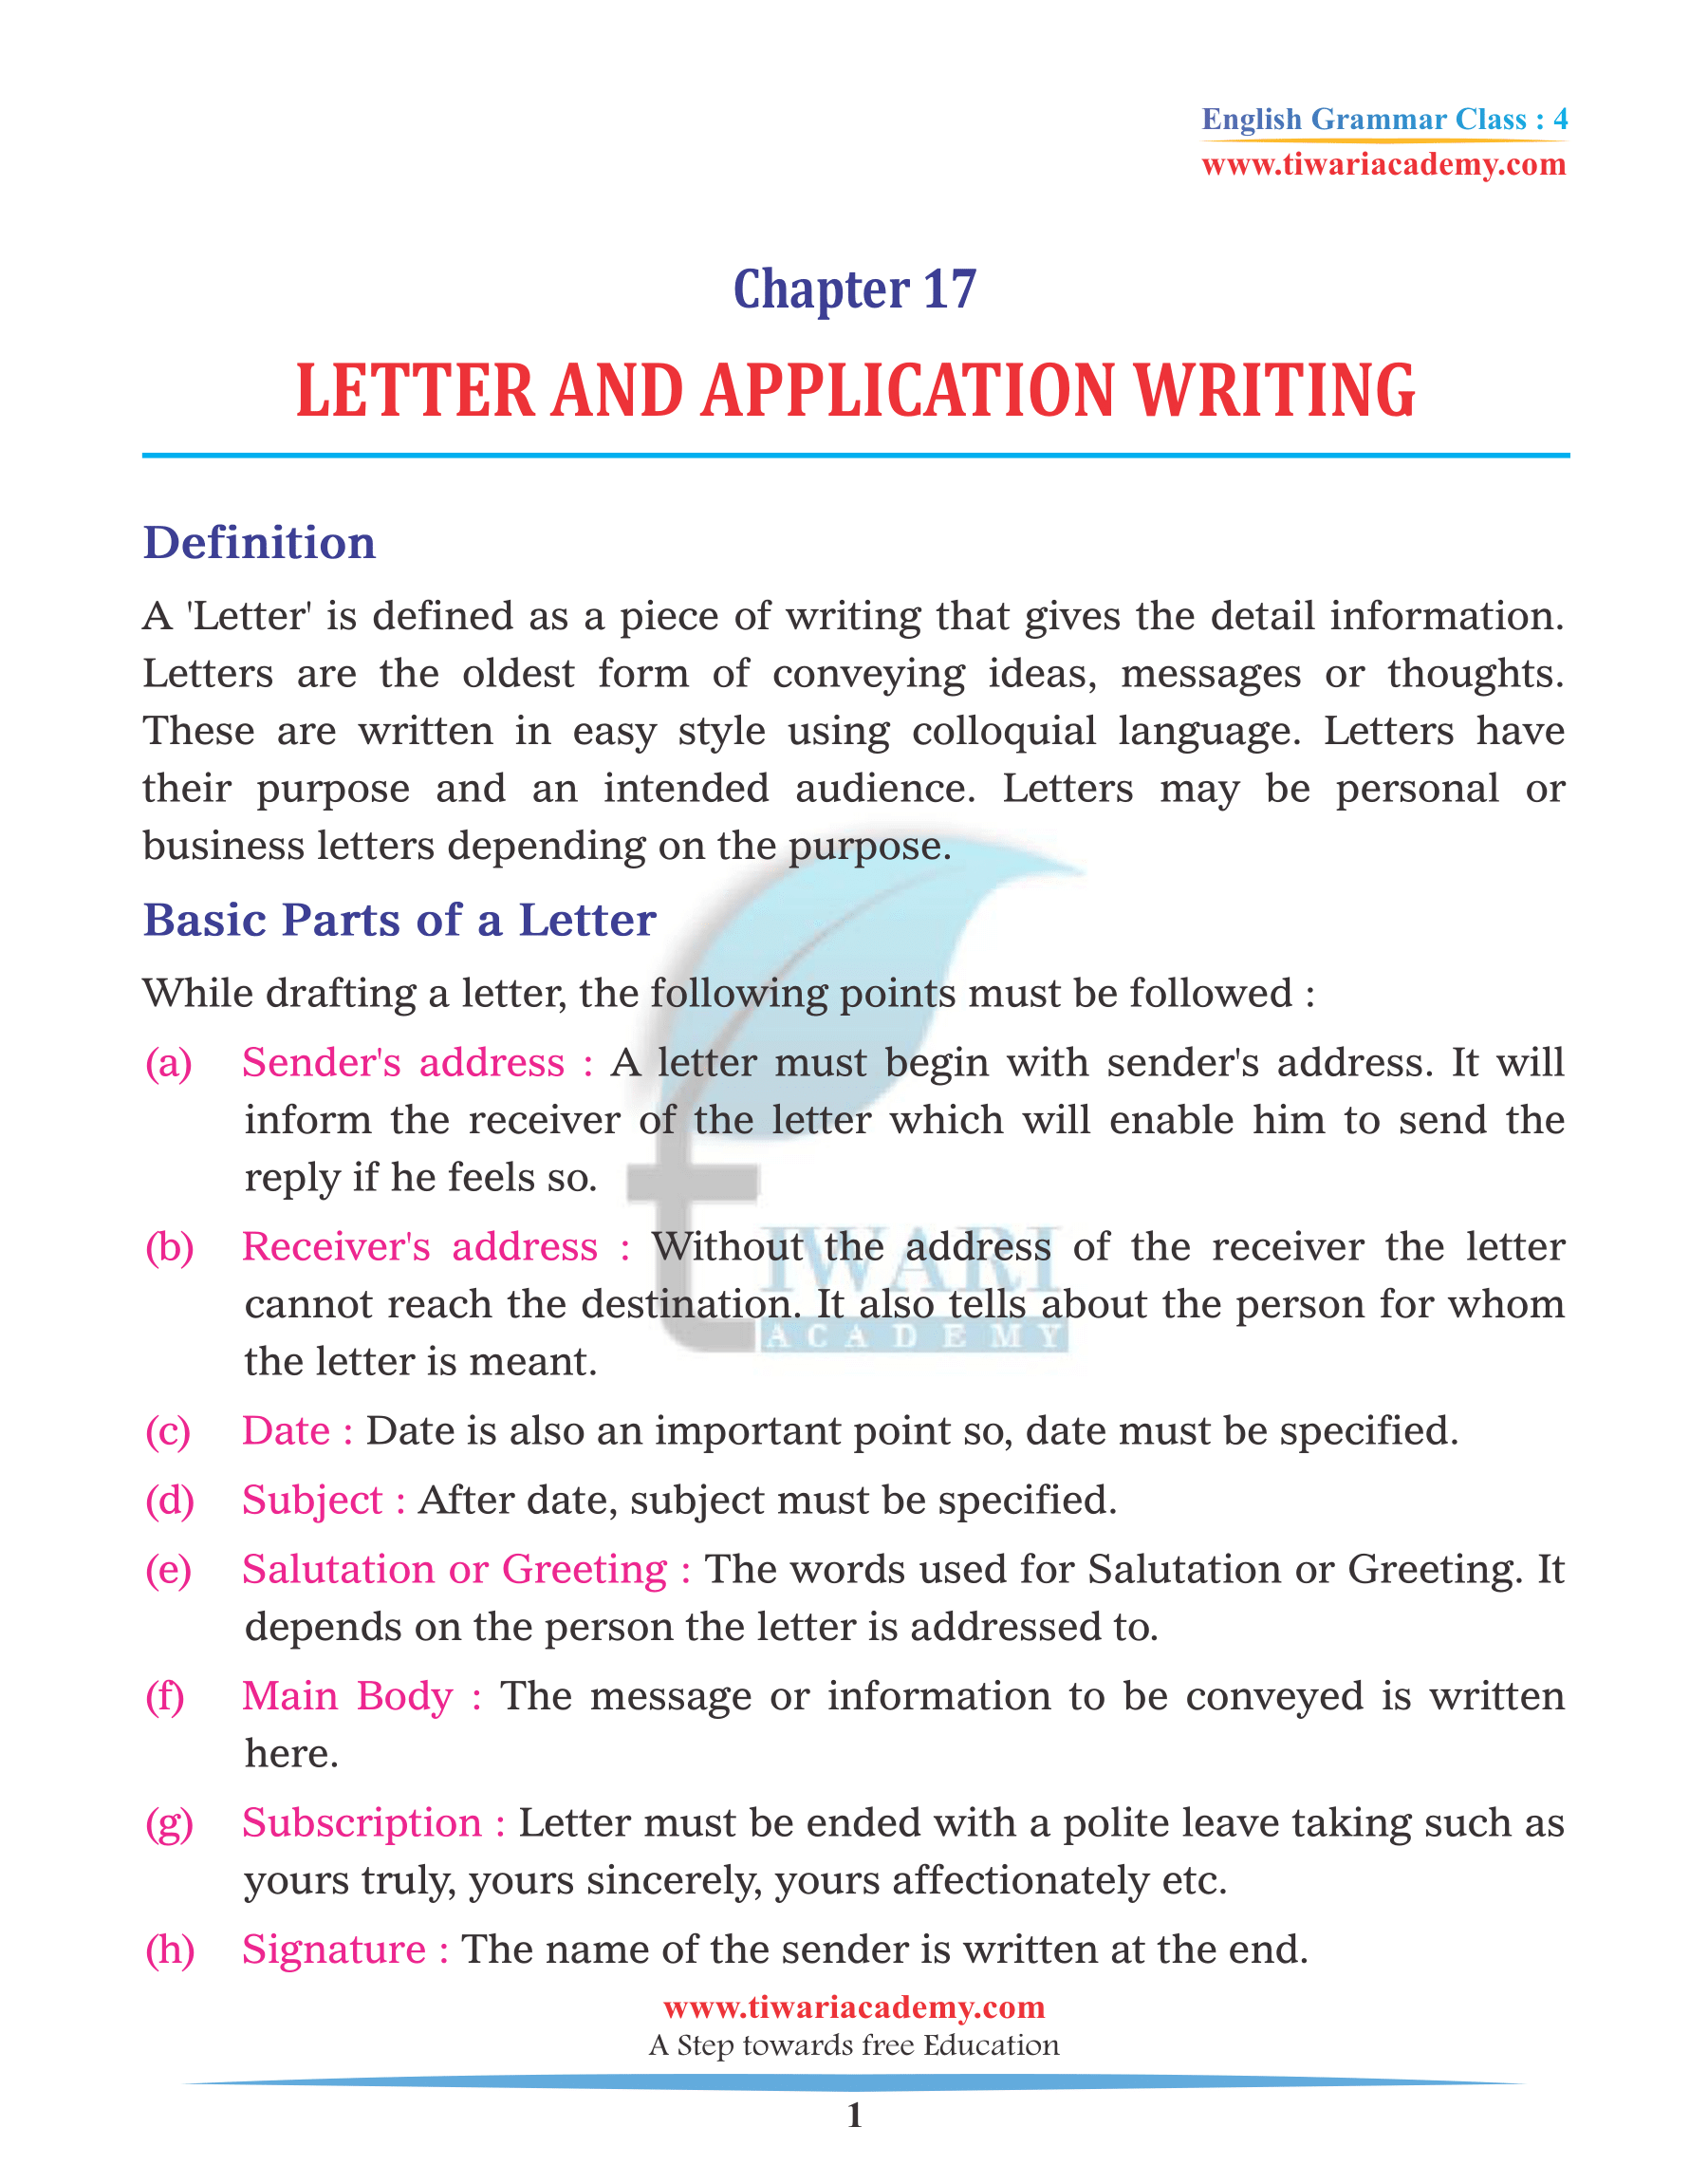 CBSE Class 4 English Grammar Chapter 17 Letter and Application Writing